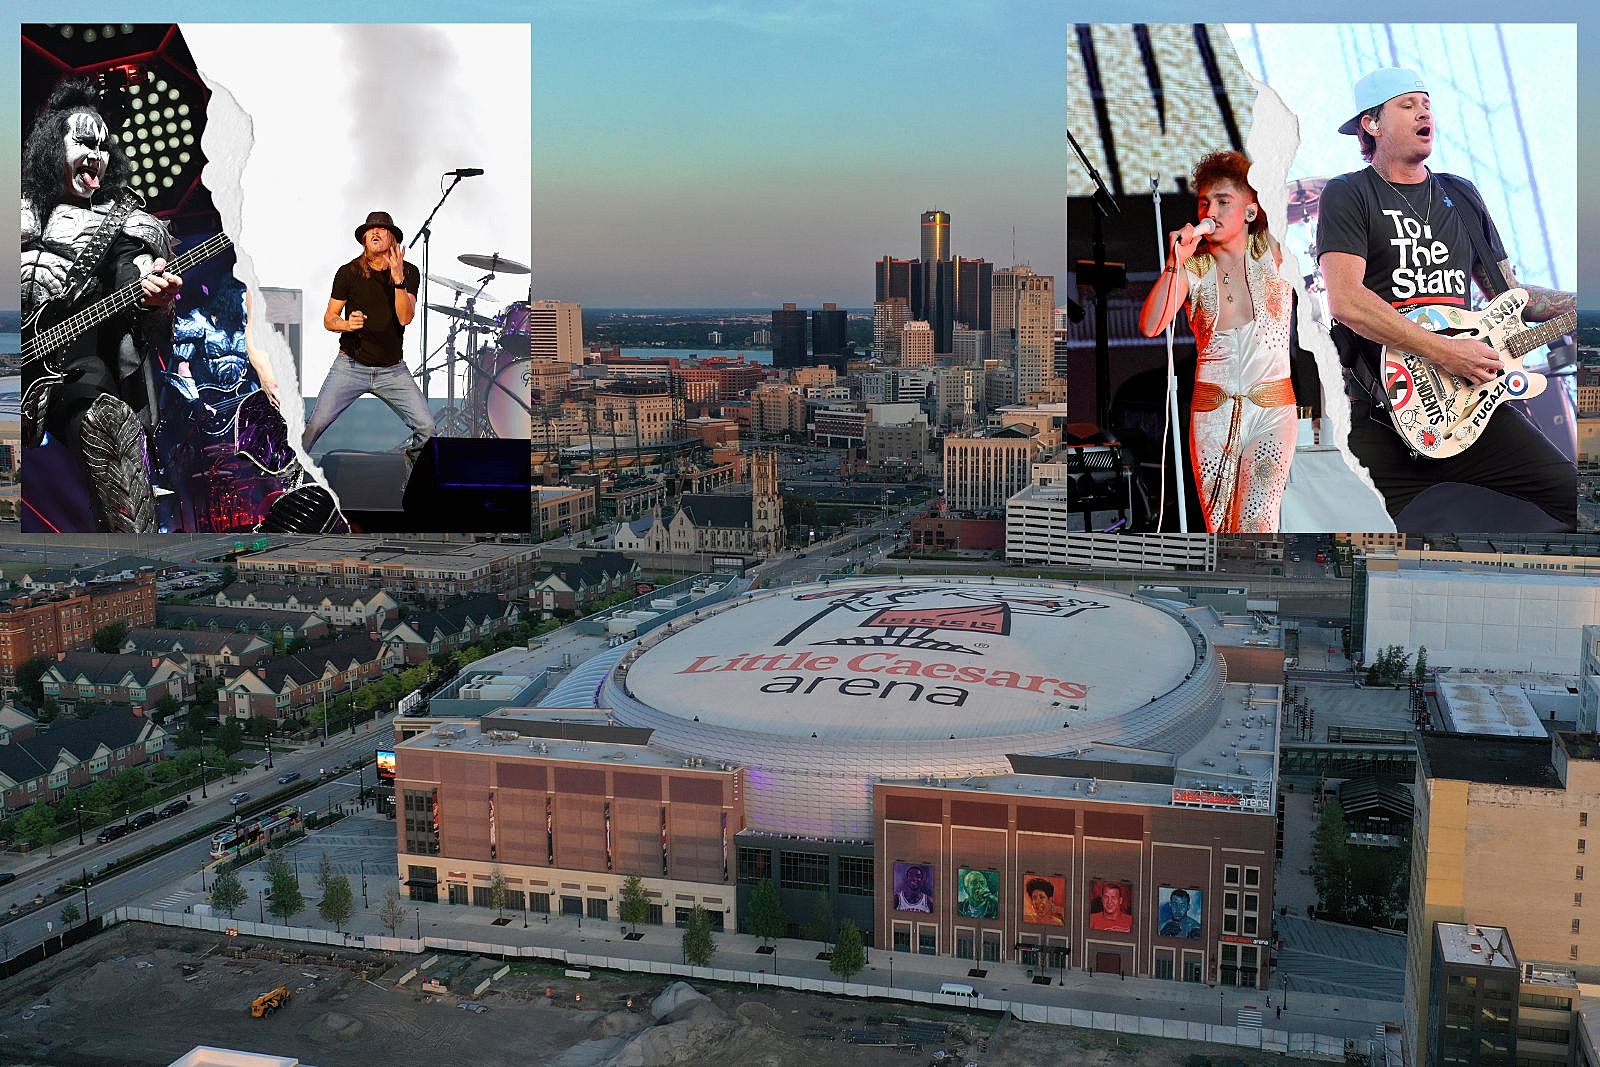 11 Big Rocks Shows Coming to Little Caesars Arena in Detroit 2023